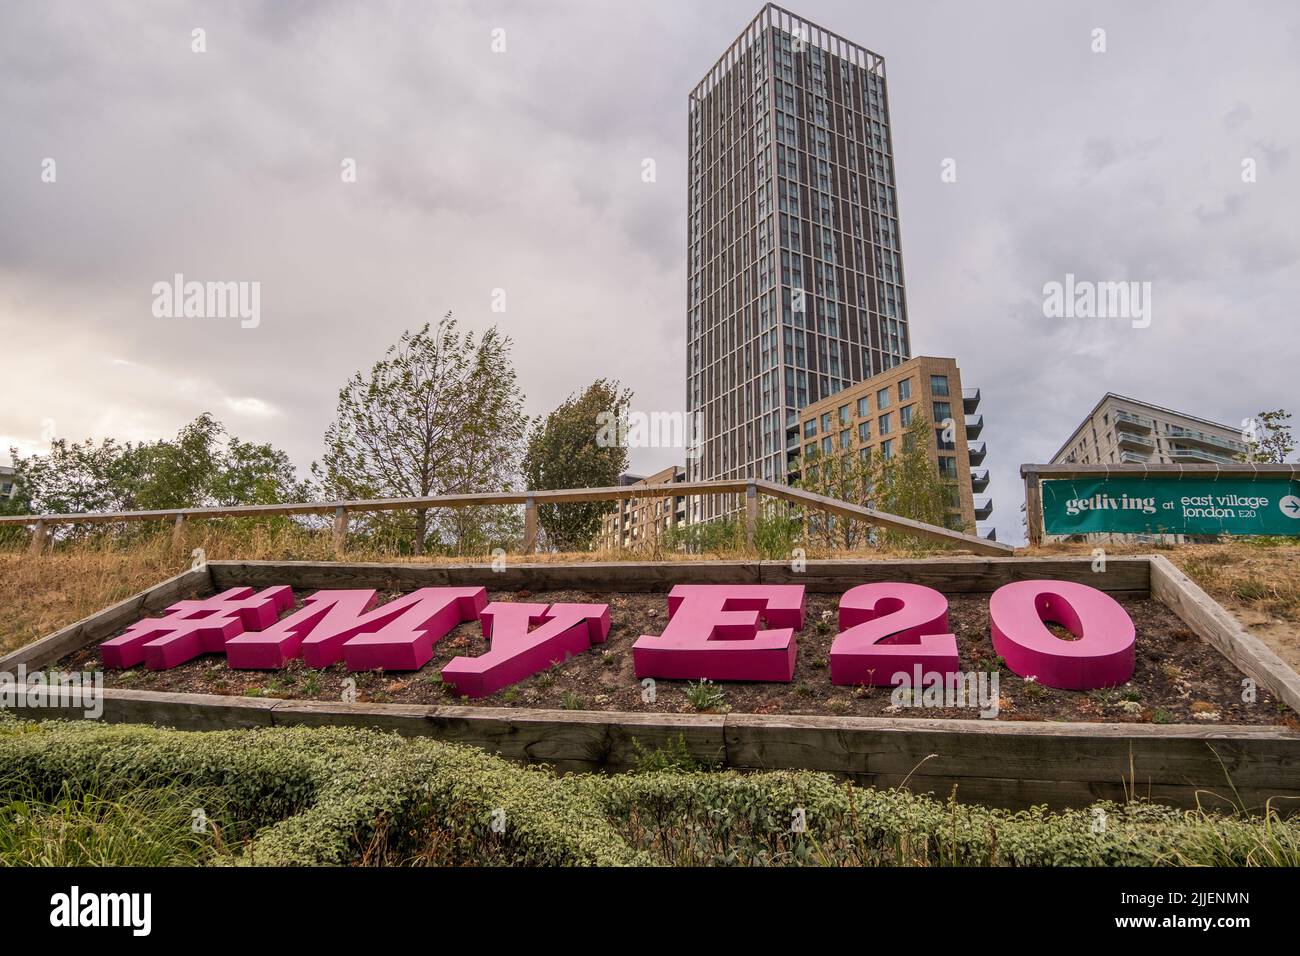 My E20, East Village slogan in the former 2012 Olympic Village, Stratford, Newham, East London, Get Living London, Insignia Point. Stock Photo